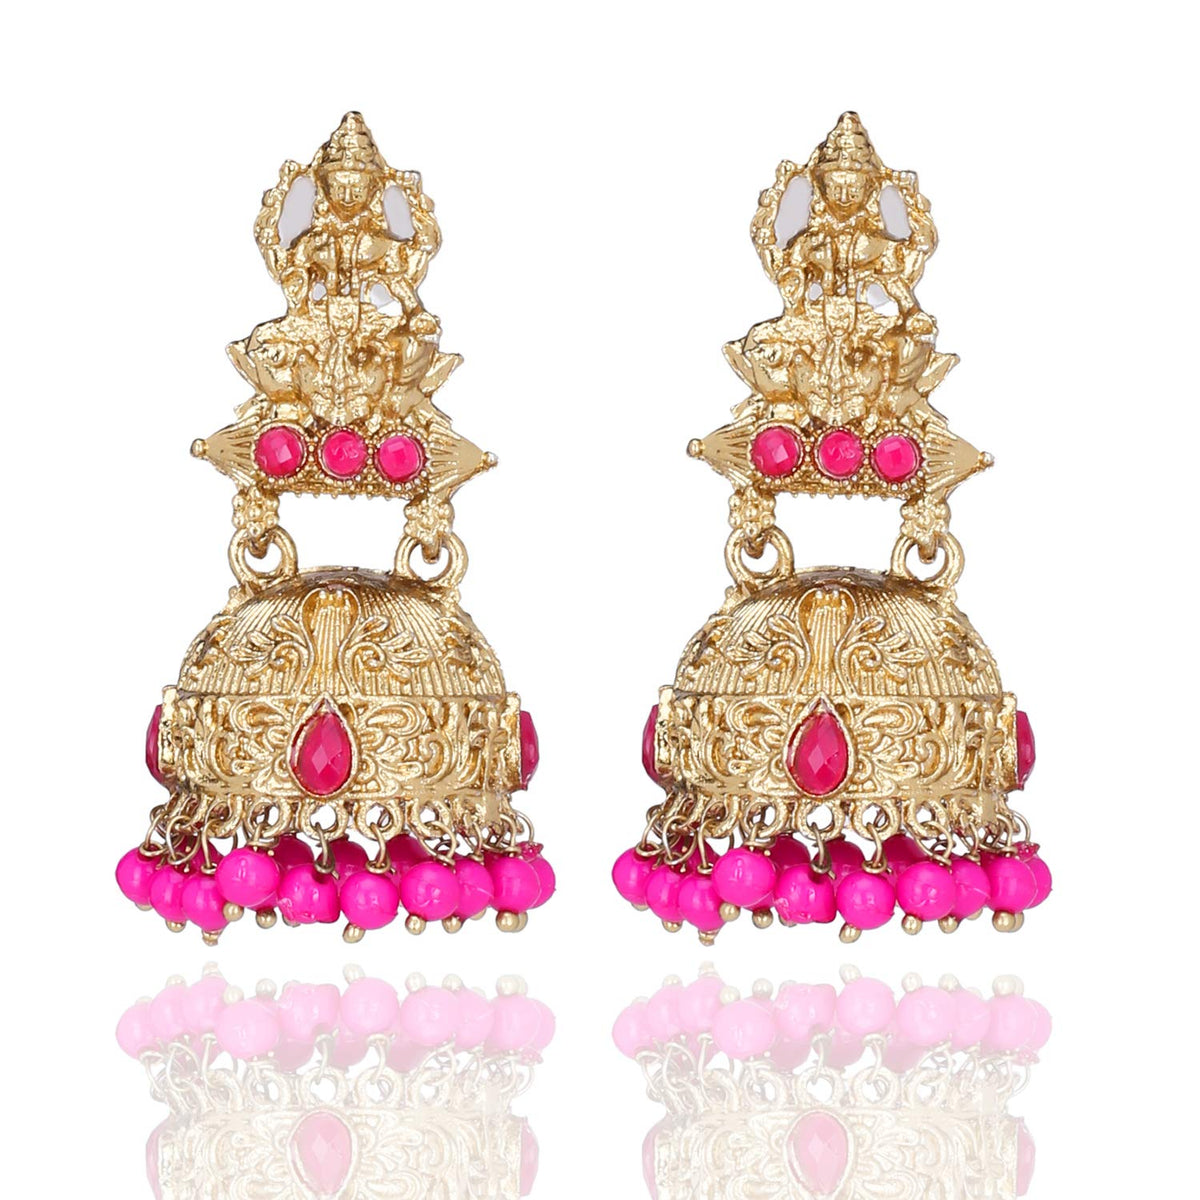 Yellow Chimes Golden Base Metal Gold Plated Artistic Crafted Lakshmi Designer Temple Traditional Jhumka/Jhumki Earrings for Women & Girls